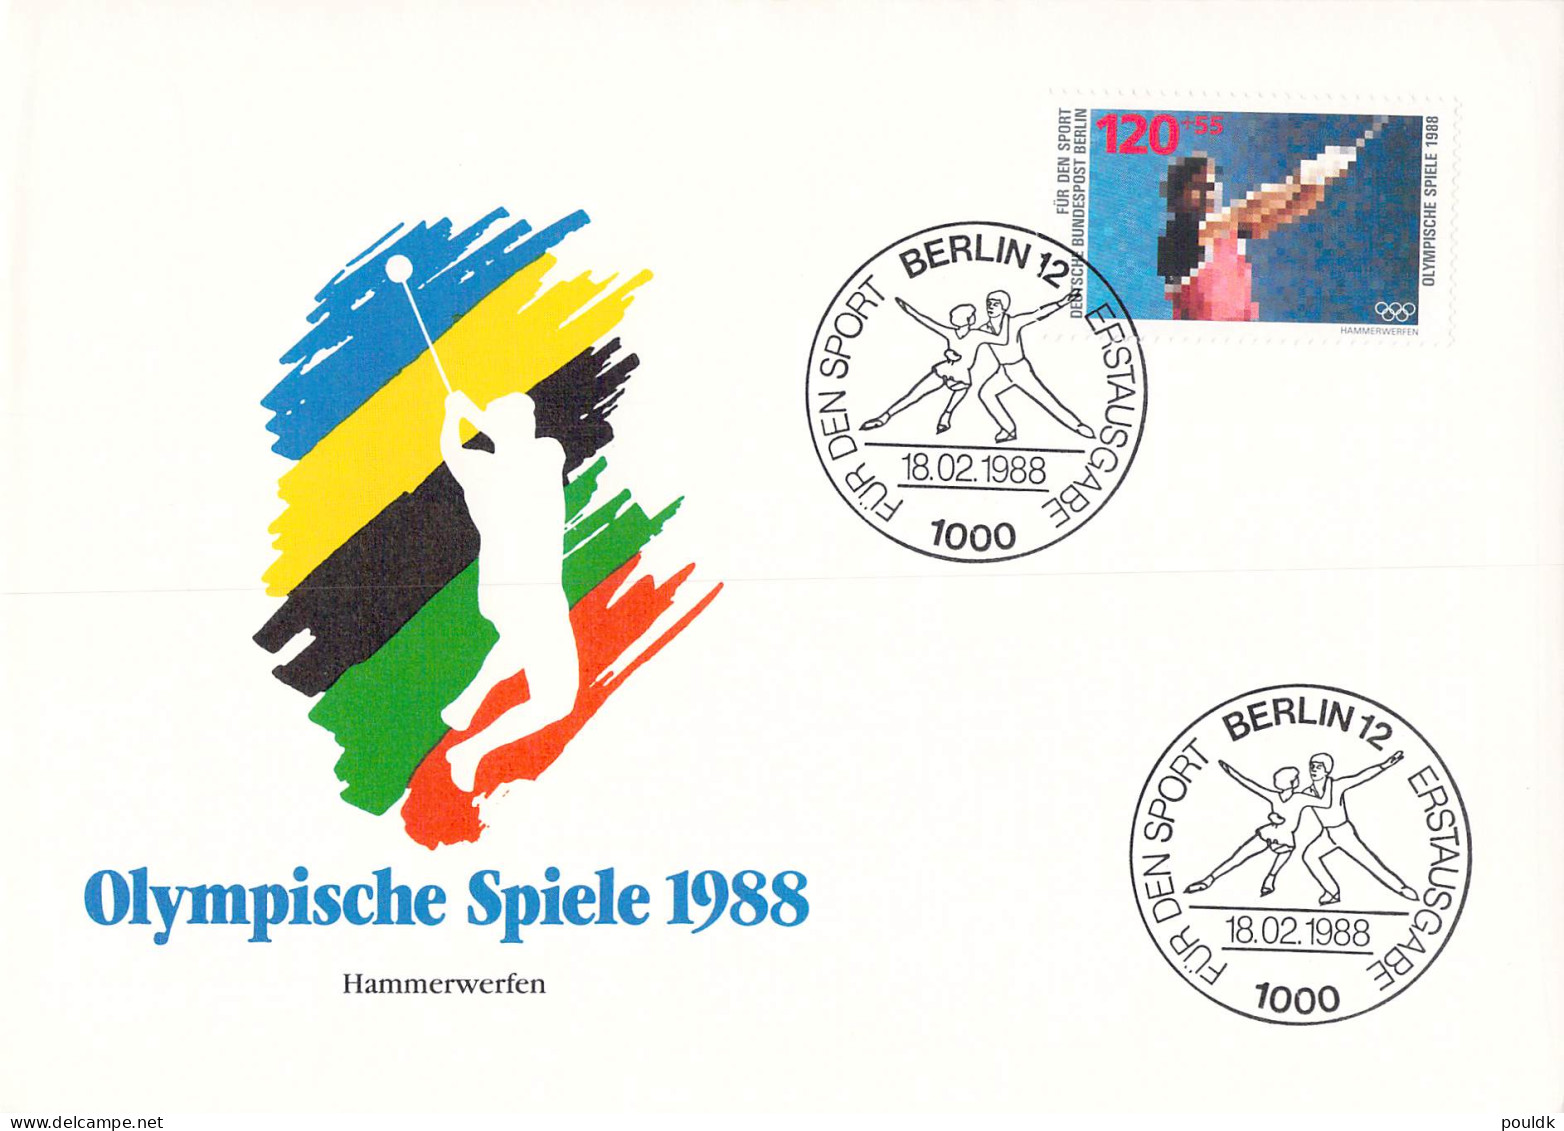 Olympic Games in Seoul 1988 - Ten Covers. Postal weight approx 0,080 kg. Please read Sales Conditions under Image